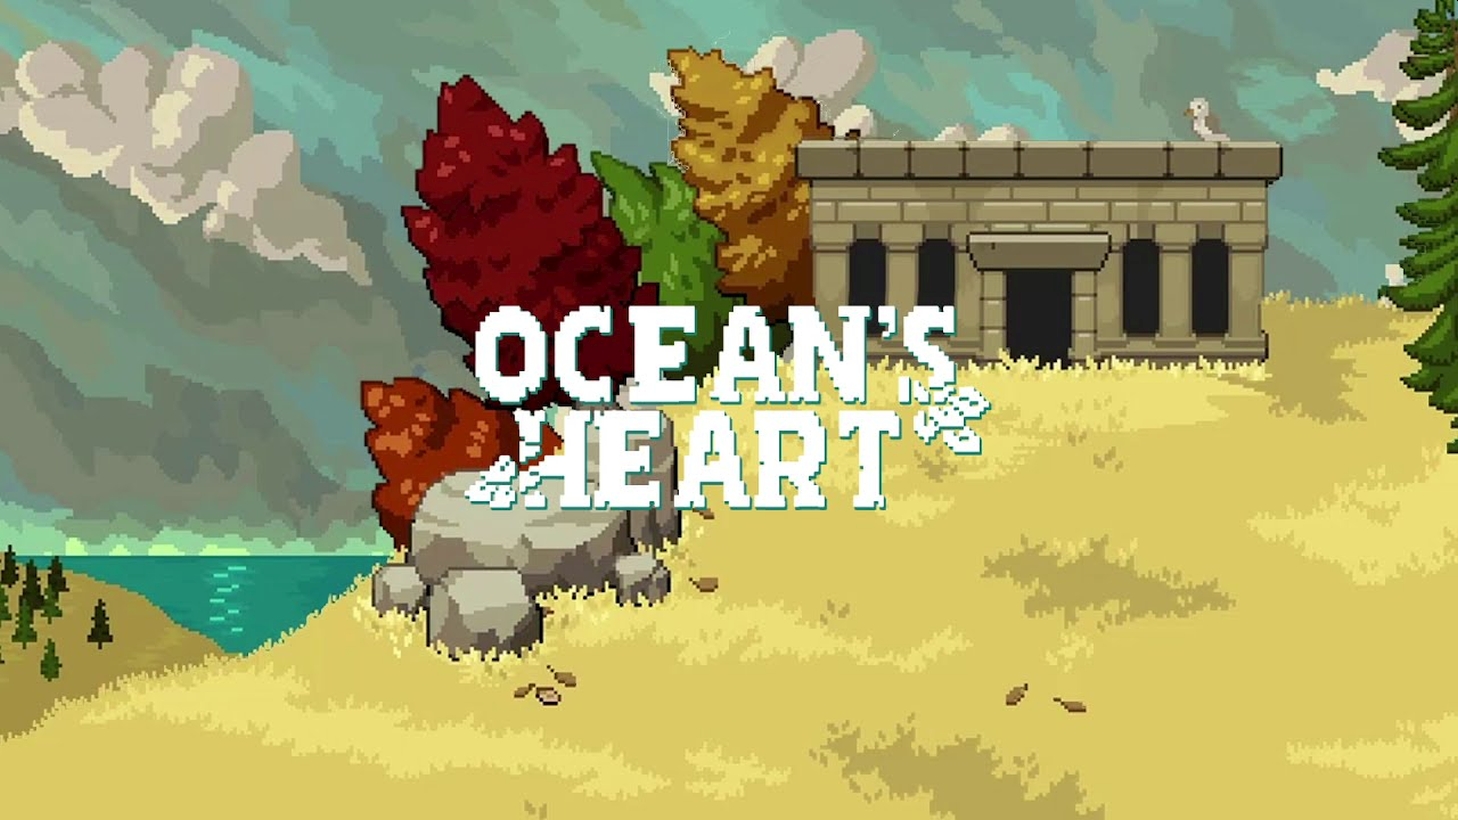 Action RPG Ocean’s Heart Makes Its Steam Debut On January 21